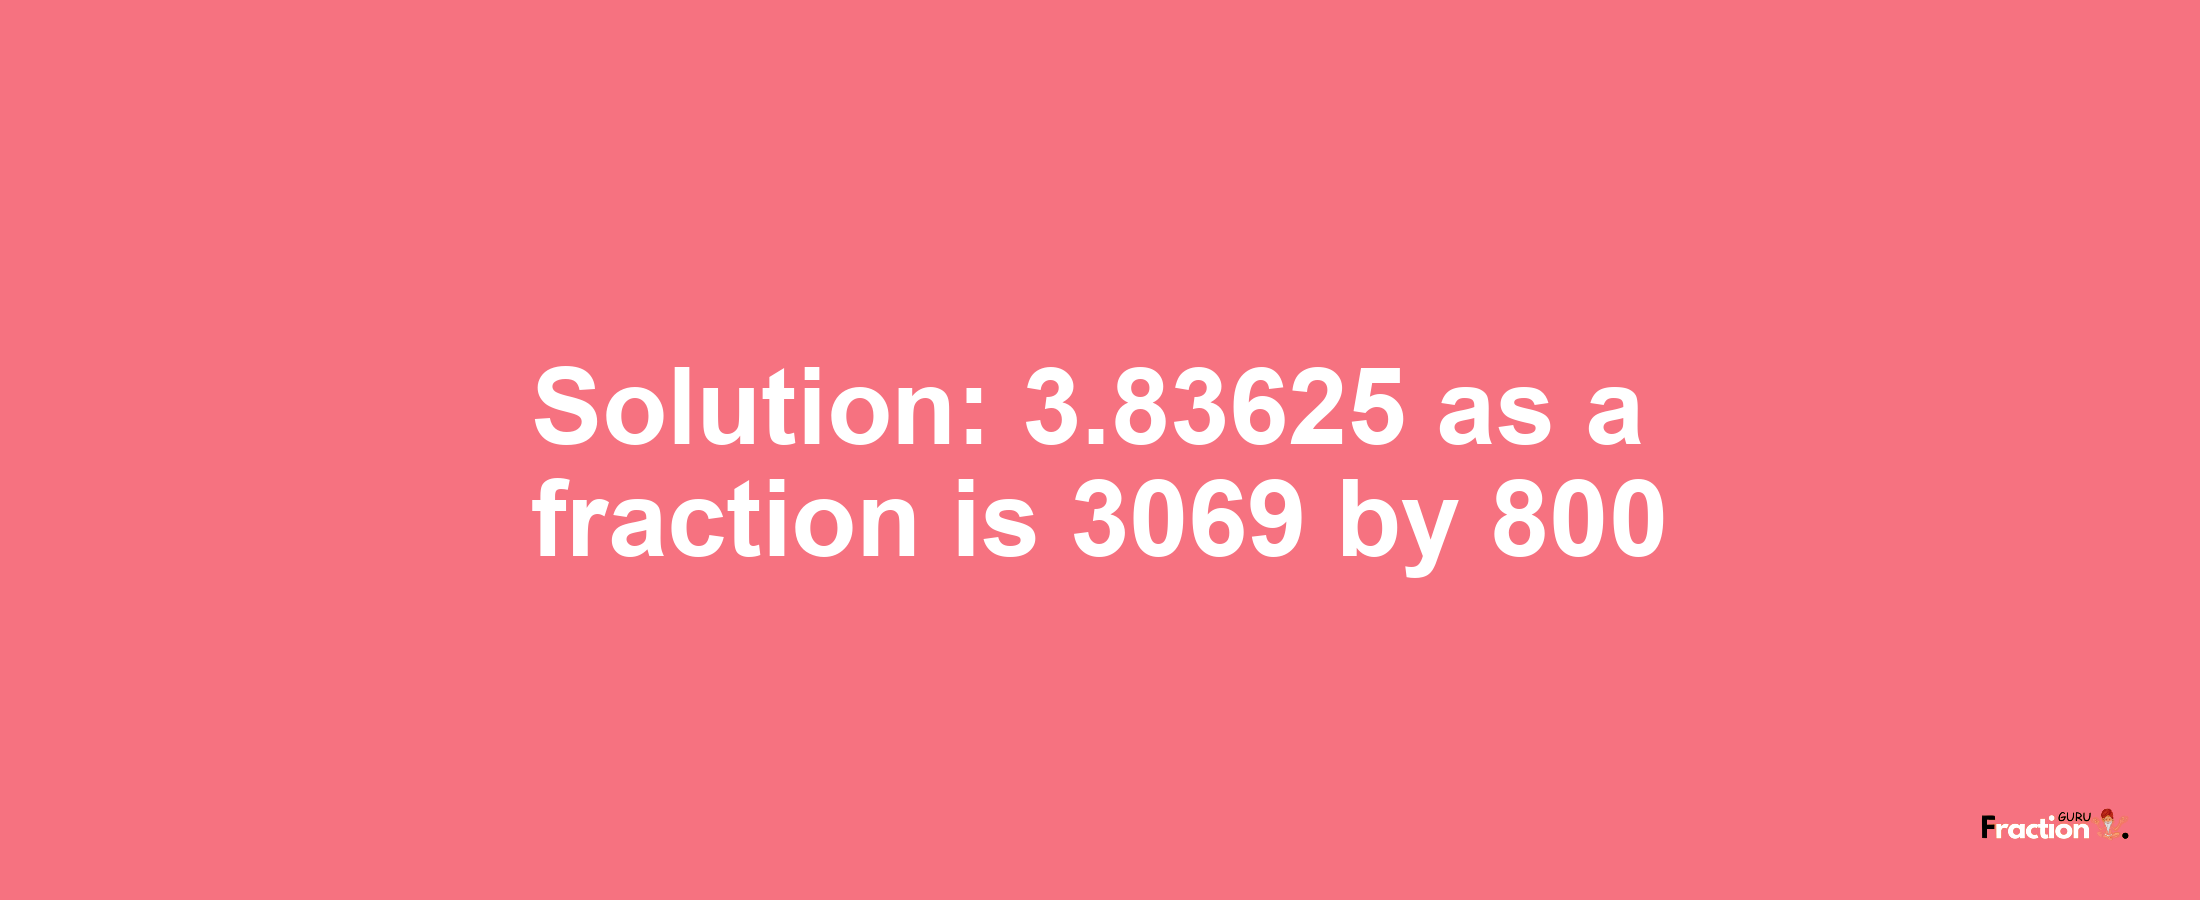 Solution:3.83625 as a fraction is 3069/800